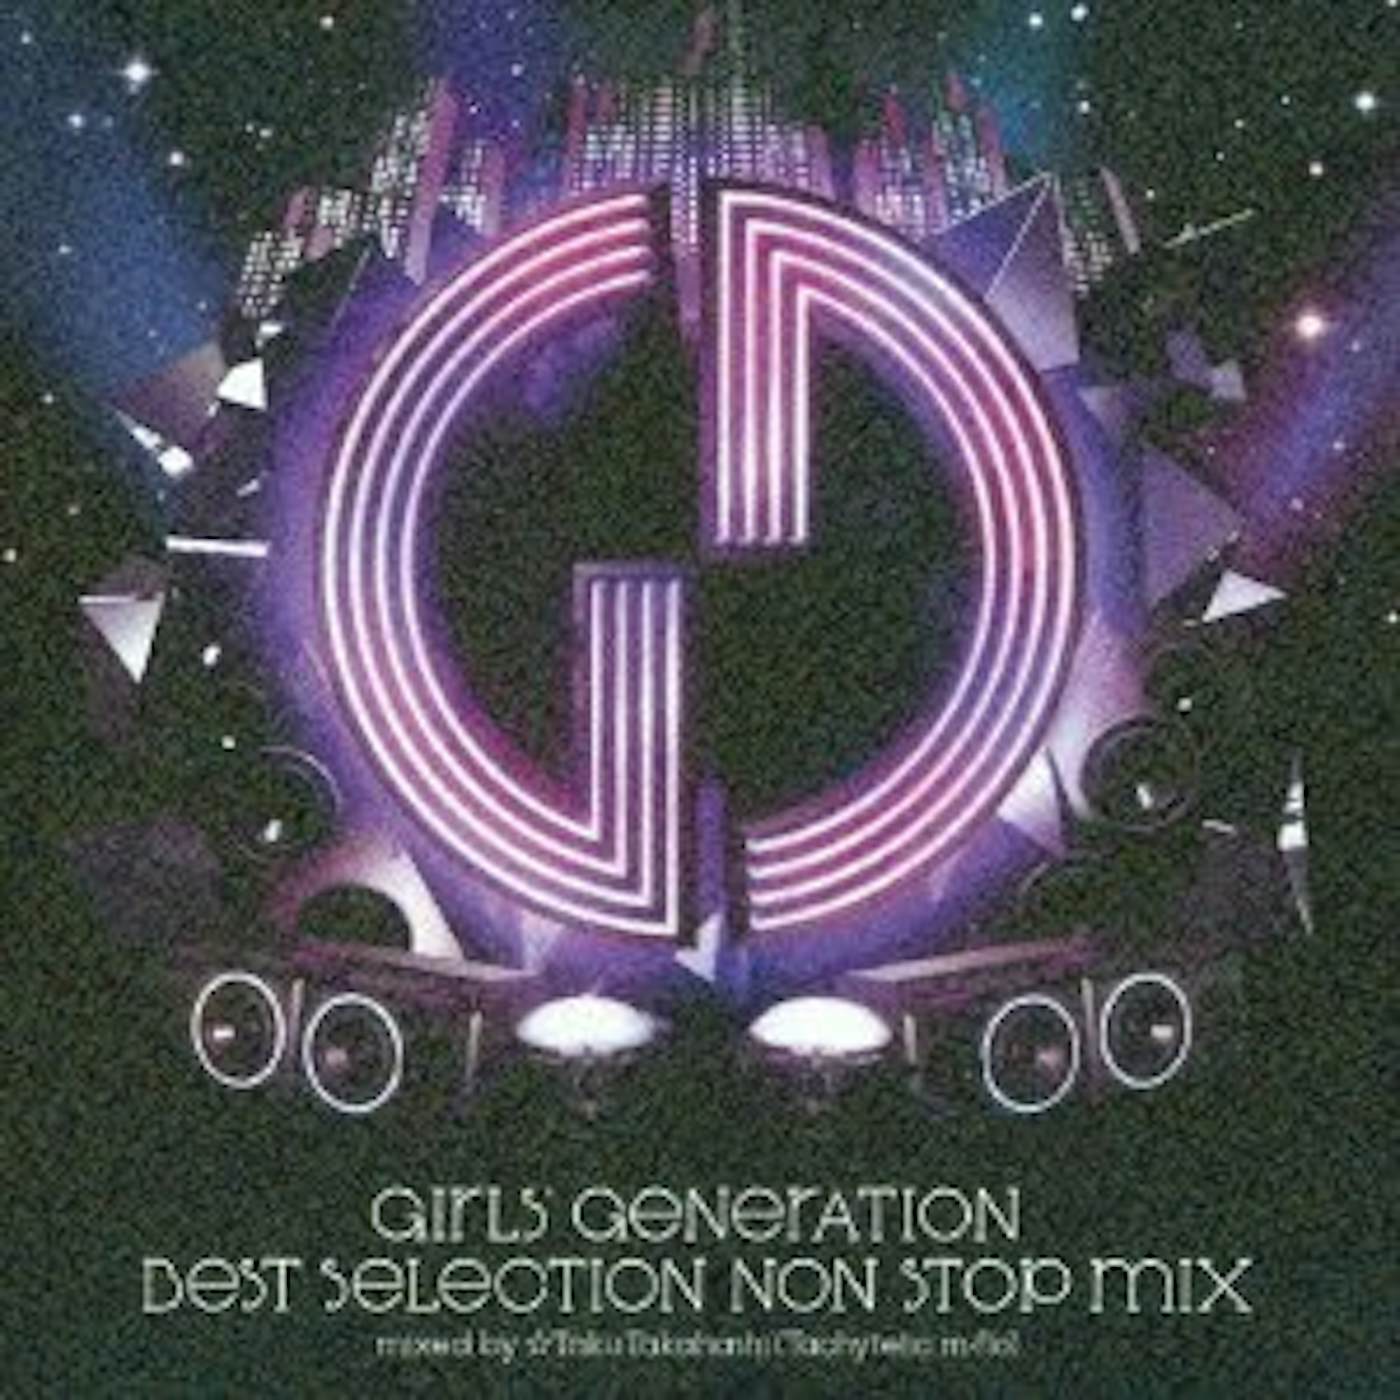 Girls' Generation BEST SELECTION NON STOP MIX CD